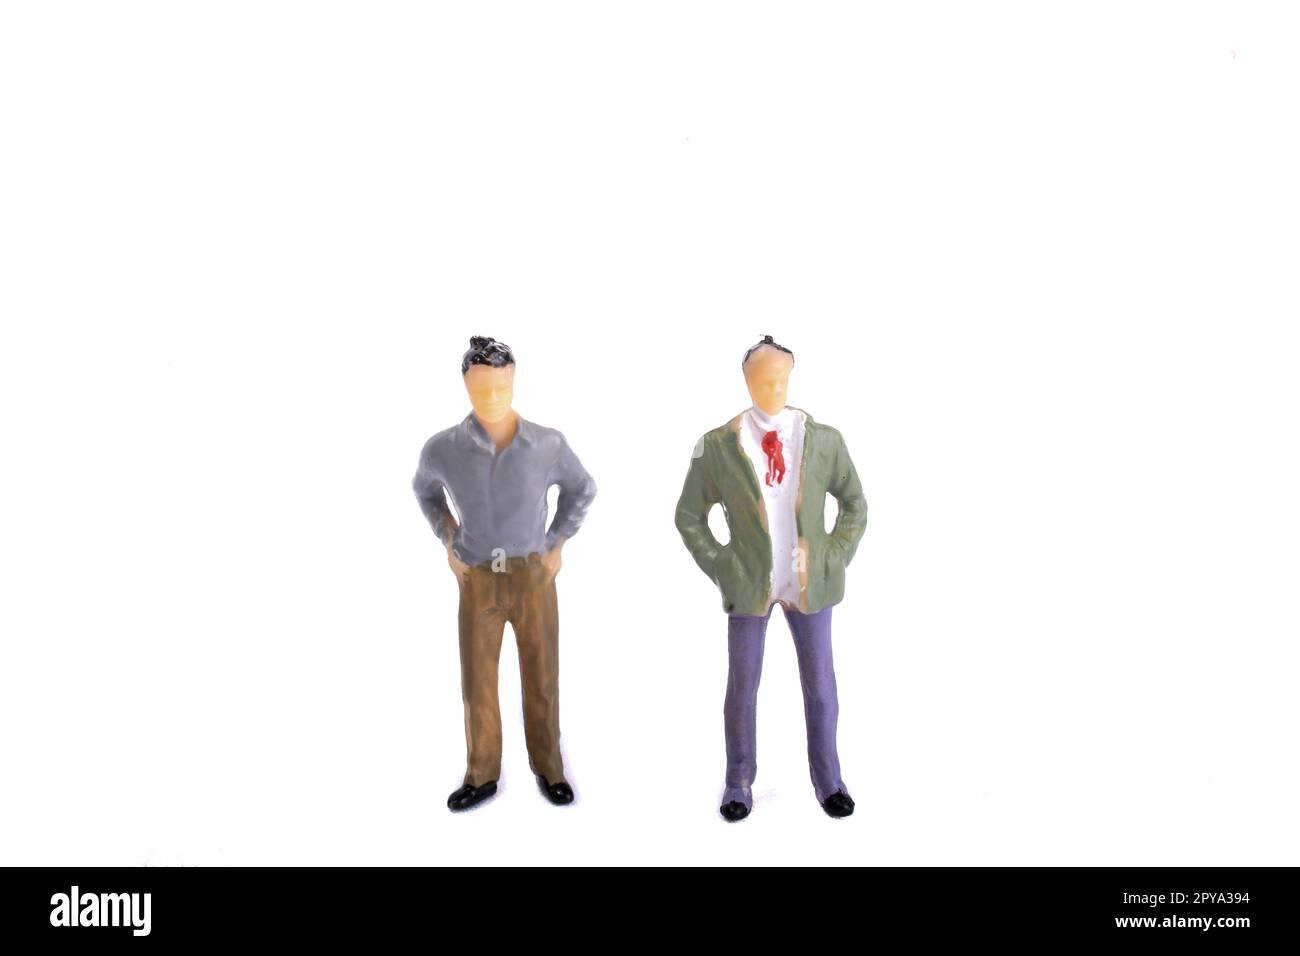 Two figurine model men standing side by side Stock Photo